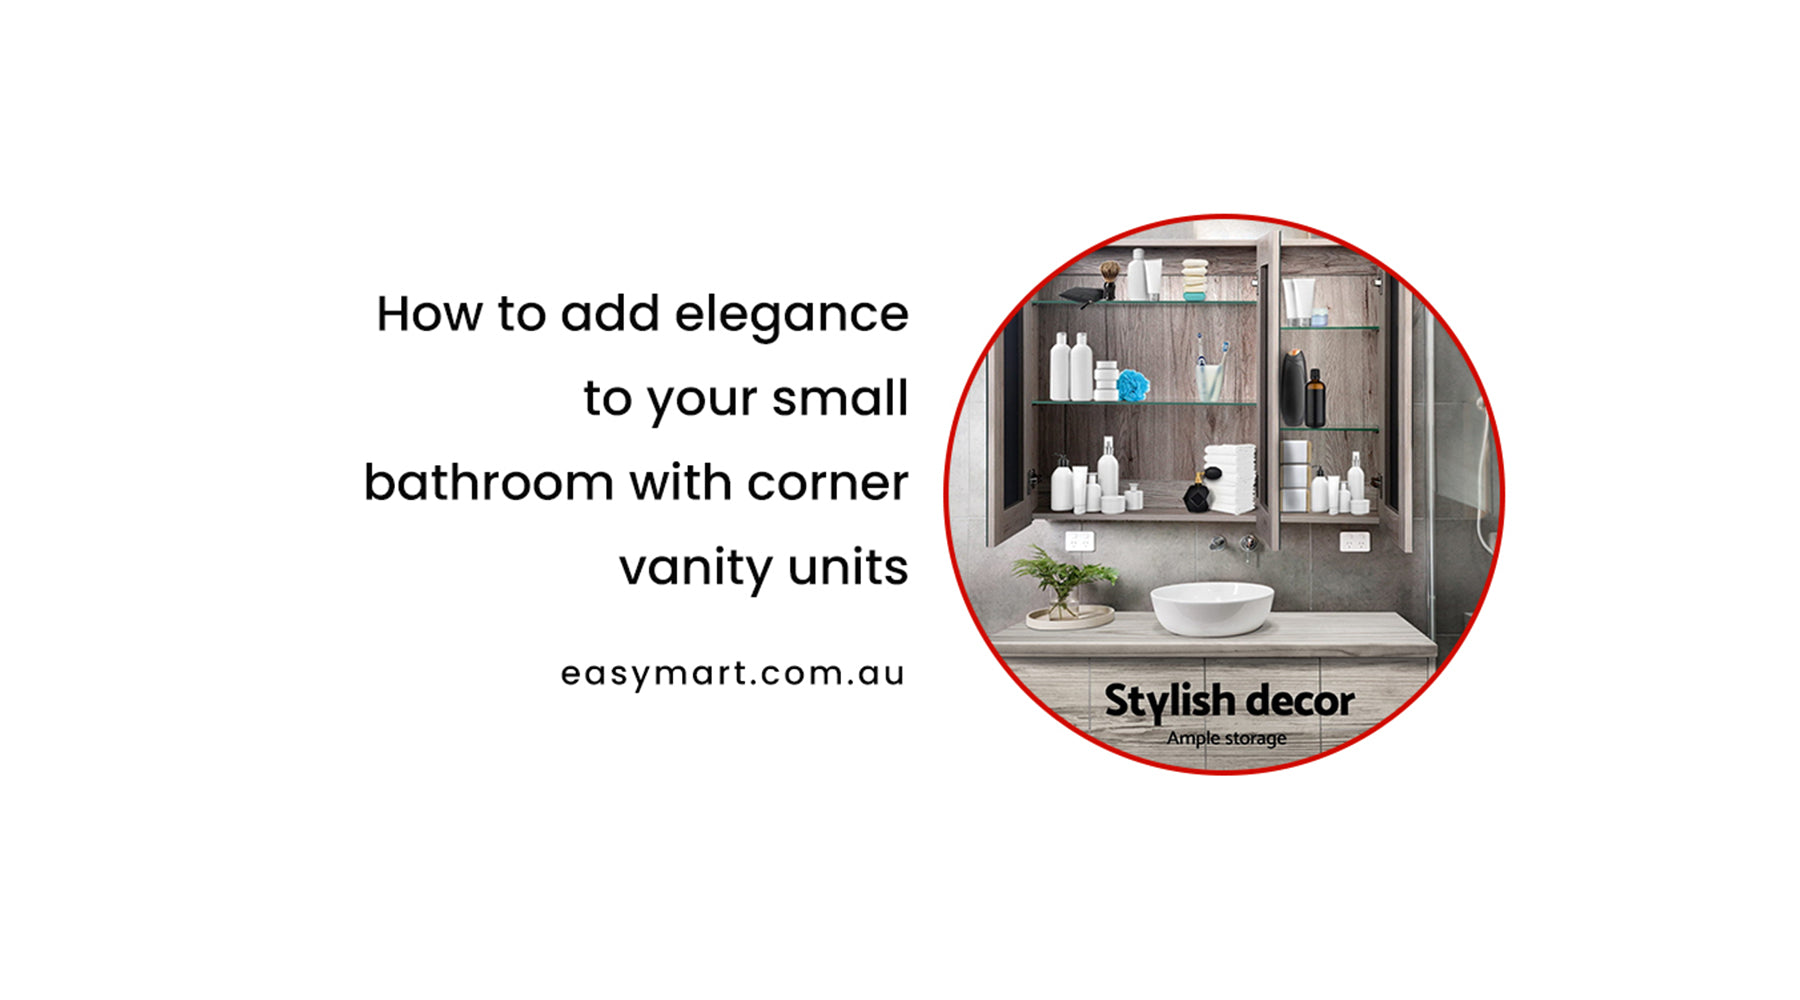 How to add elegance to your small bathroom with corner vanity units